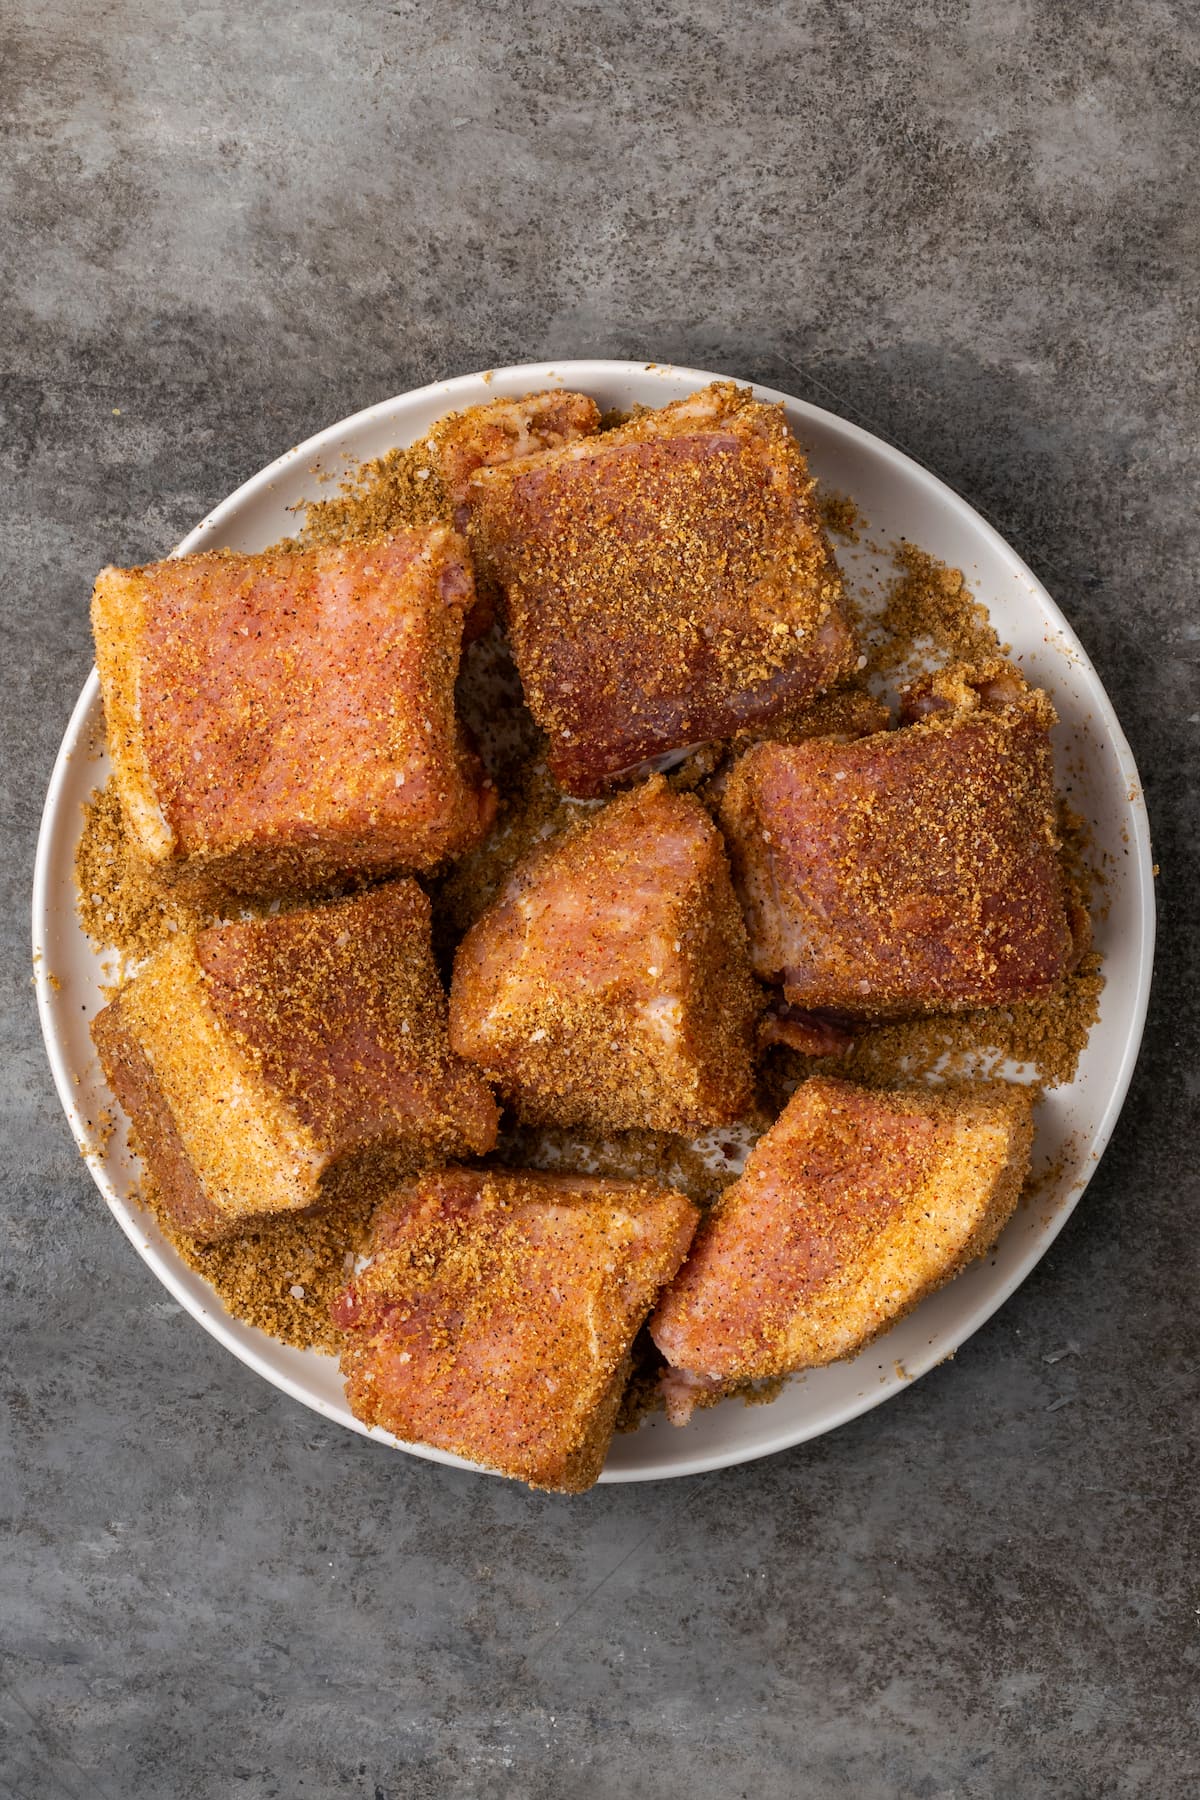 Pieces of pork butt coated in seasoning rub on a plate.